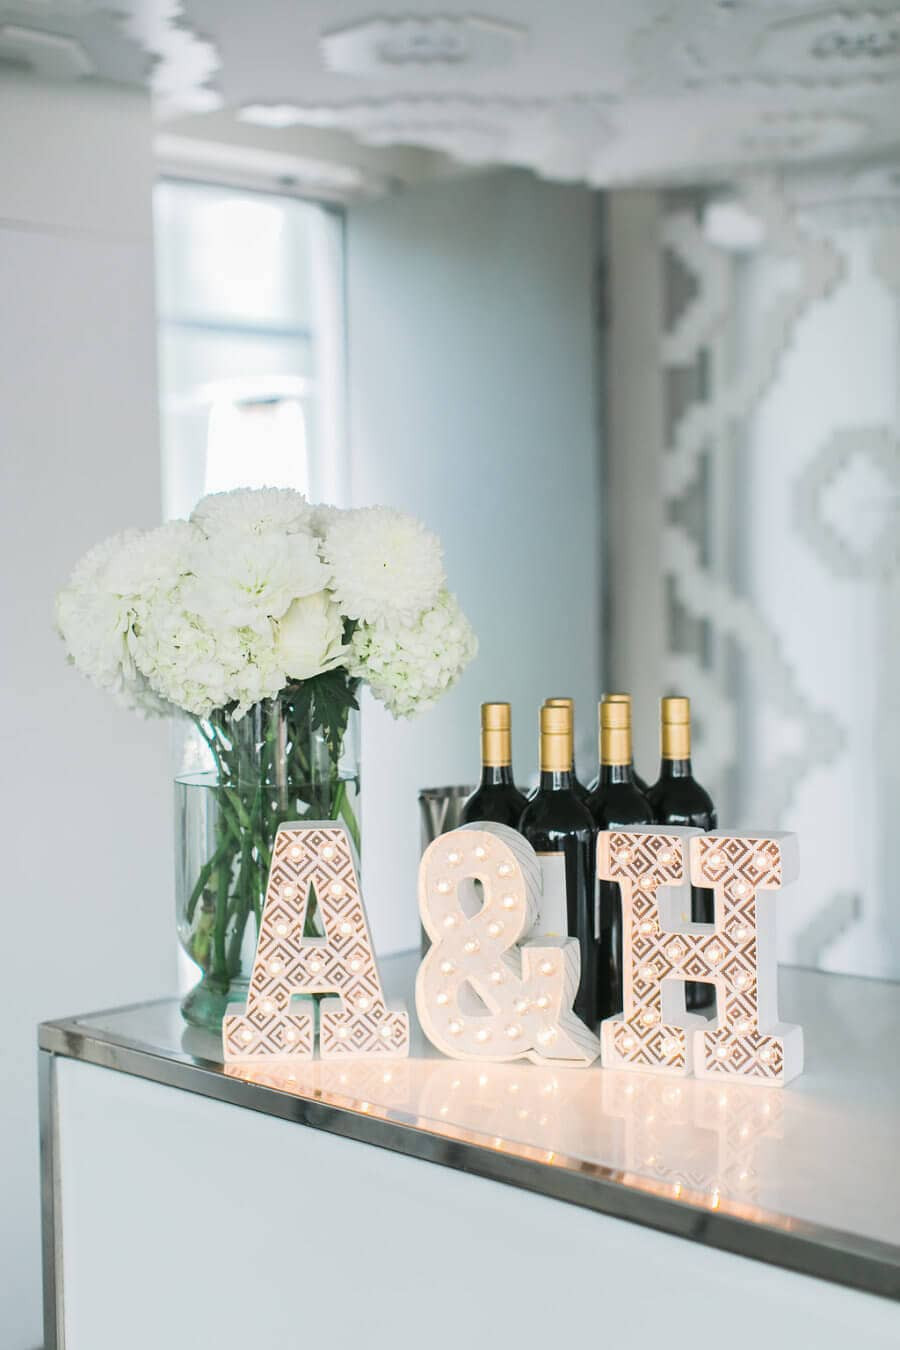 Party Ideas For Engagement Party
 25 Amazing DIY Engagement Party Decoration Ideas for 2020